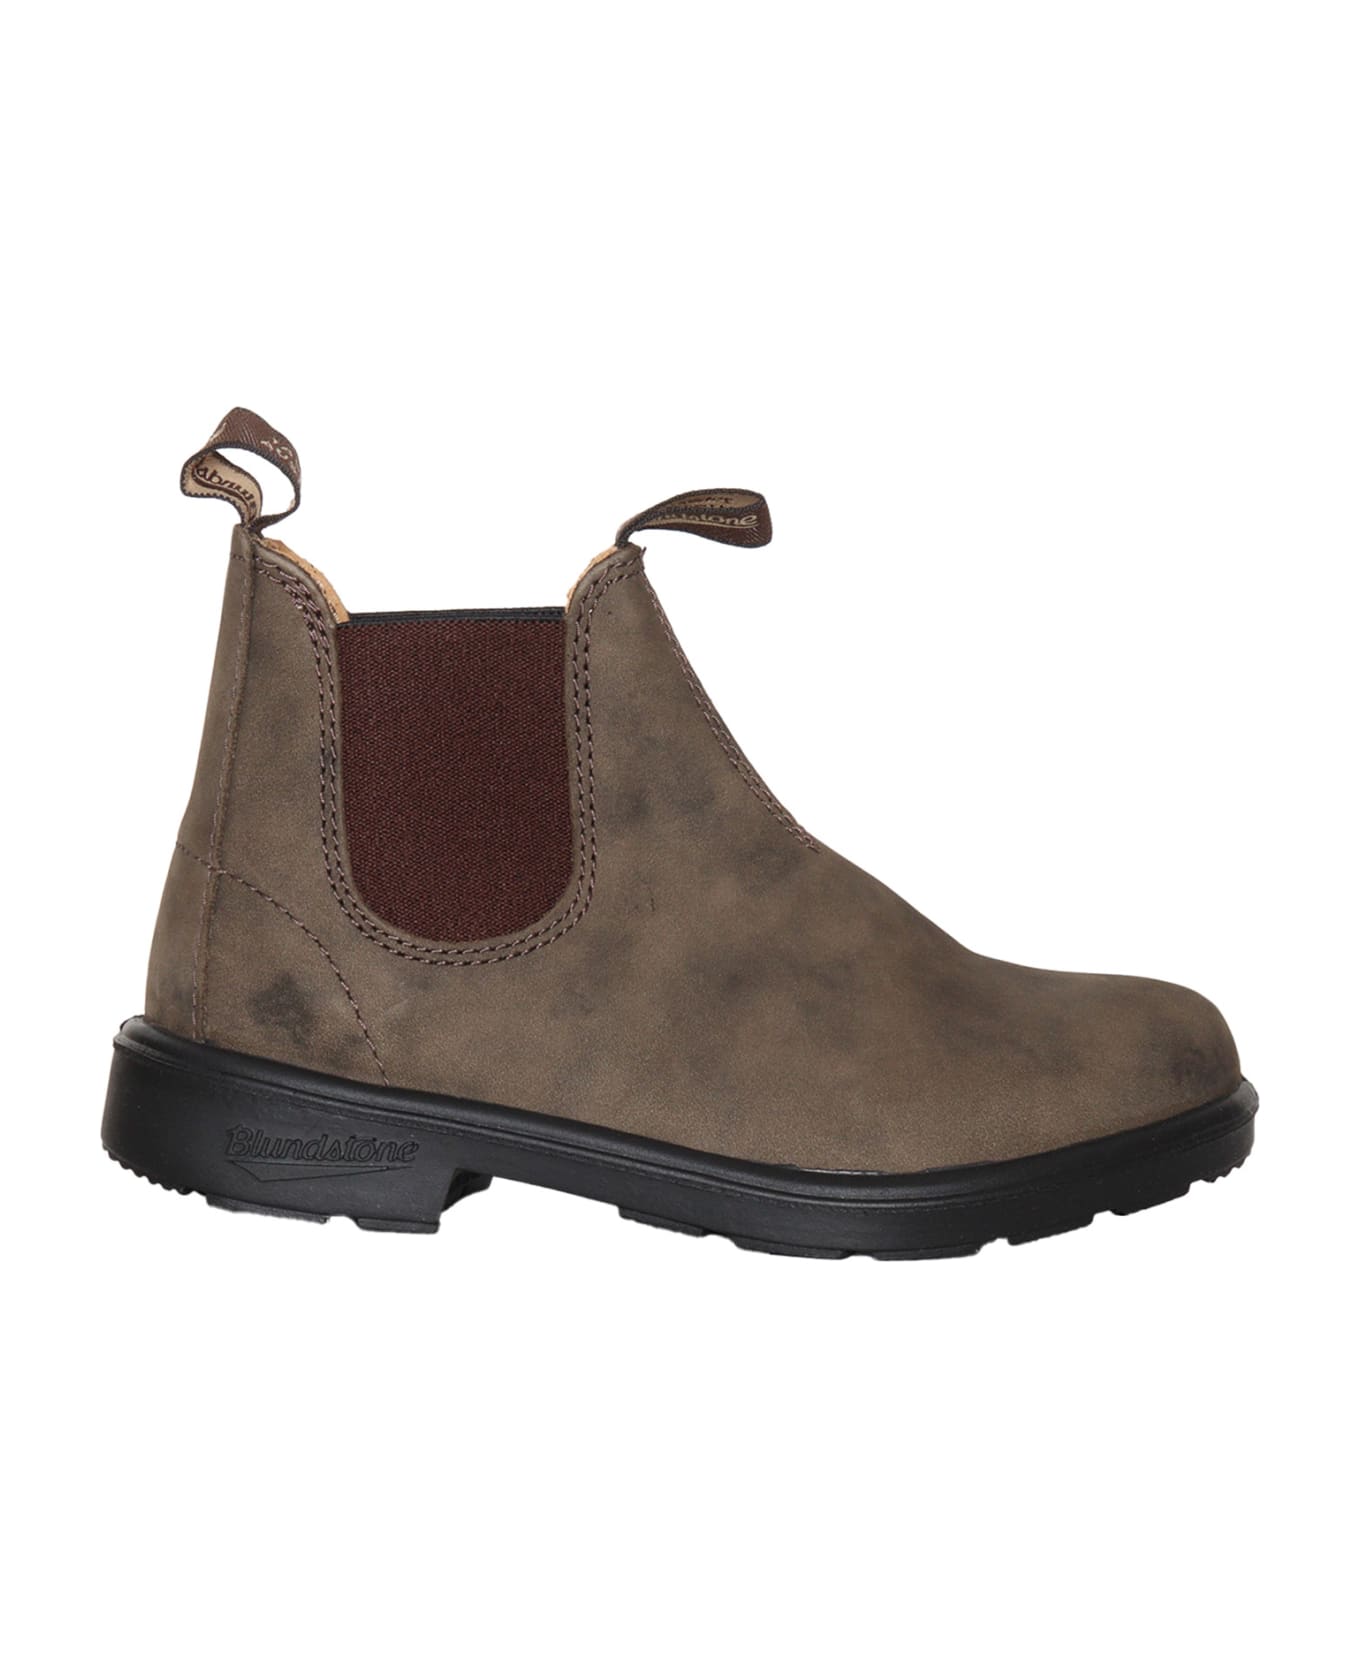 Blundstone Rustic Ankle Boots - BROWN